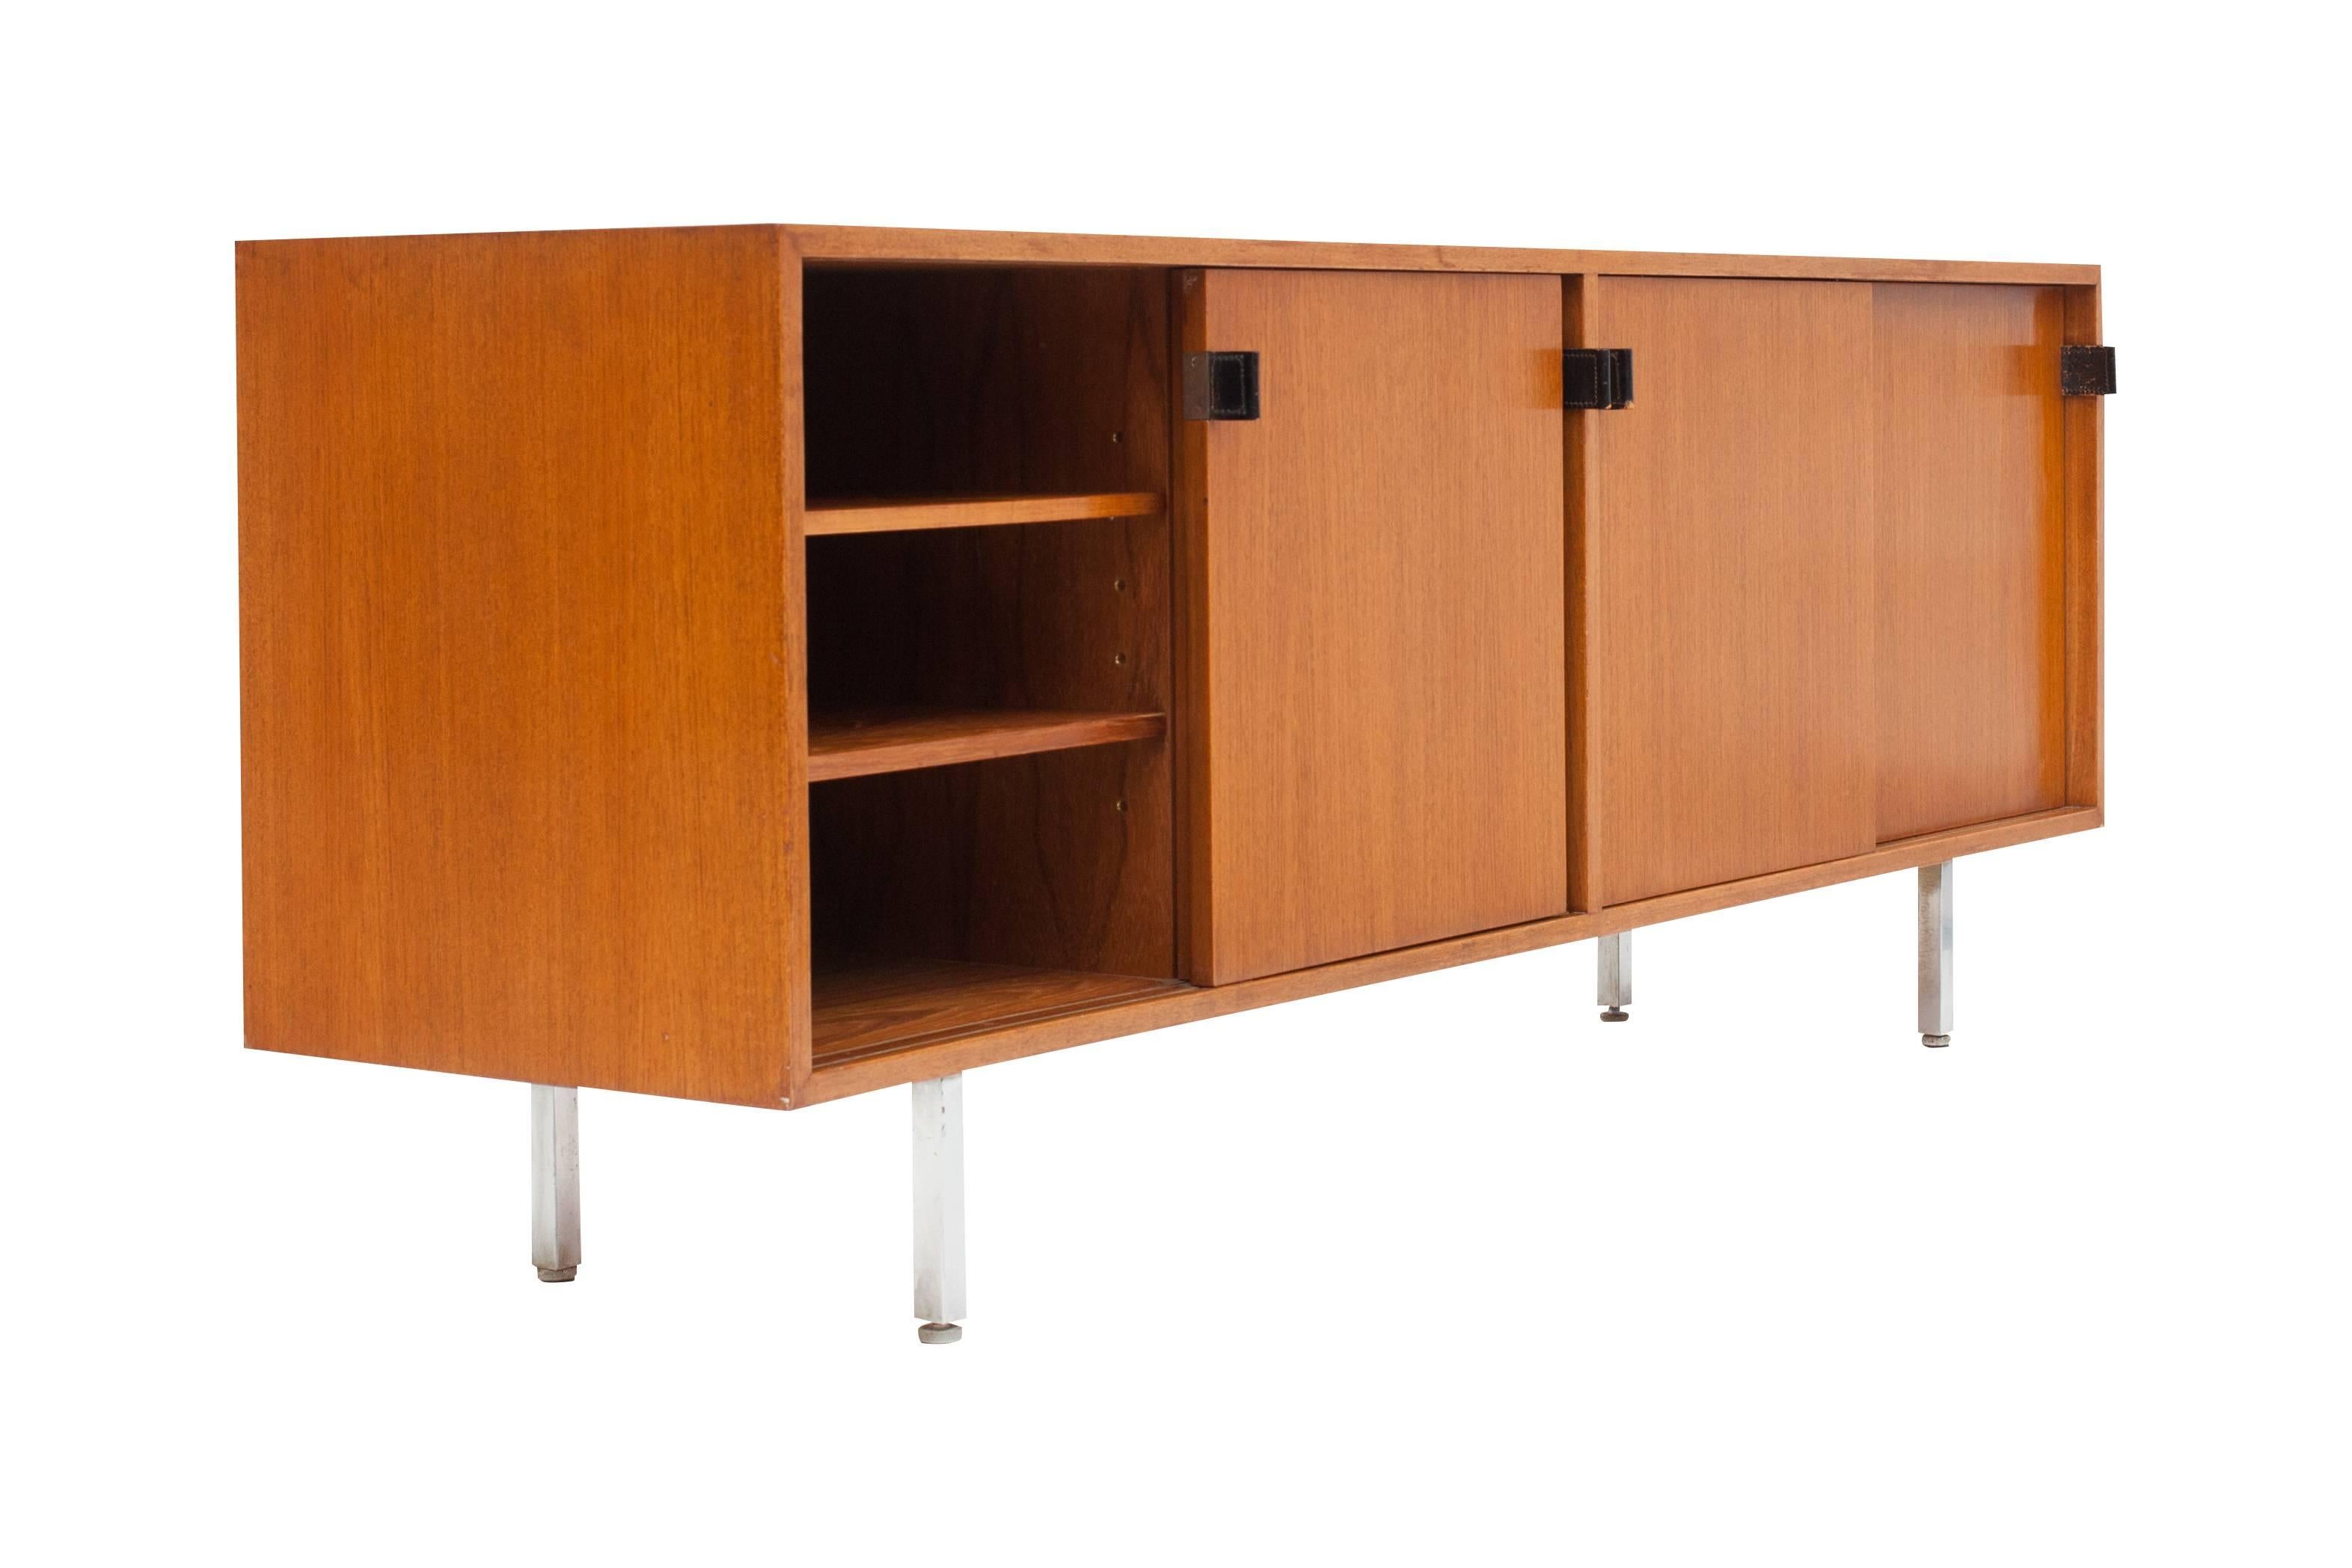 Chrome Florence Knoll Credenza in Teak, Manufactured by De Coene, 1950s